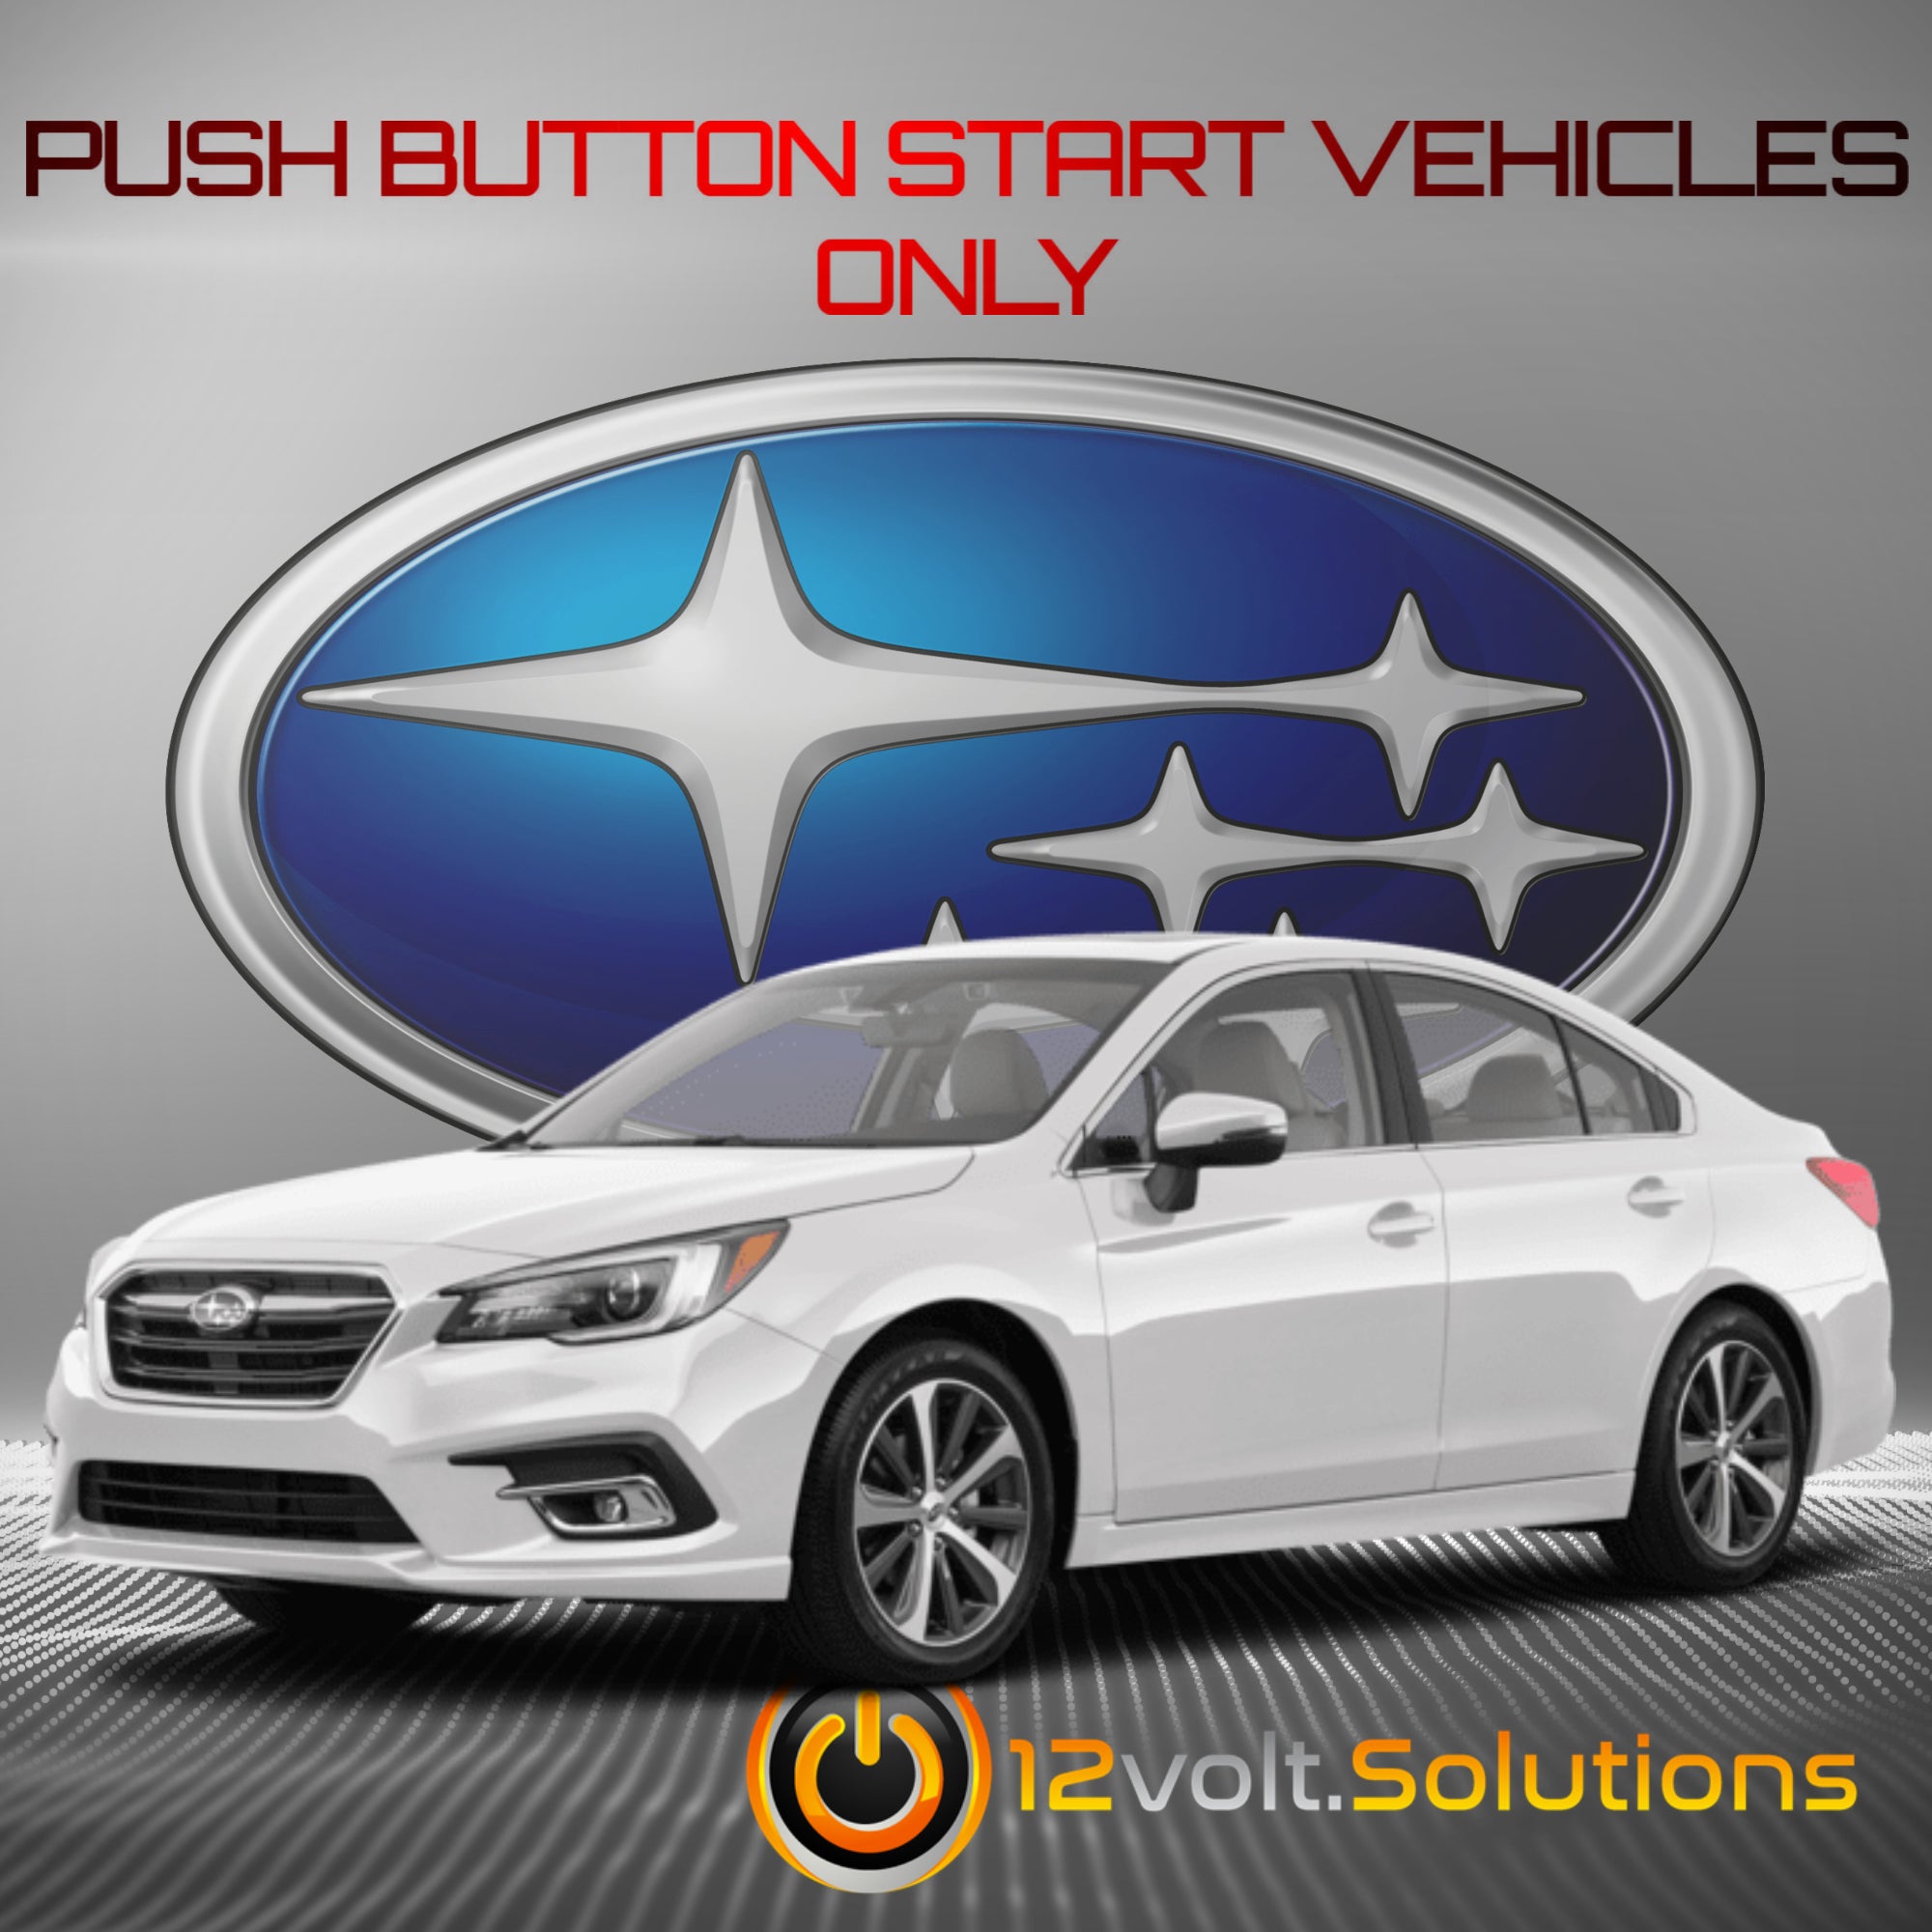 2018-2019 Subaru Legacy Plug and Play Remote Start Kit (Push Button Start)-12Volt.Solutions